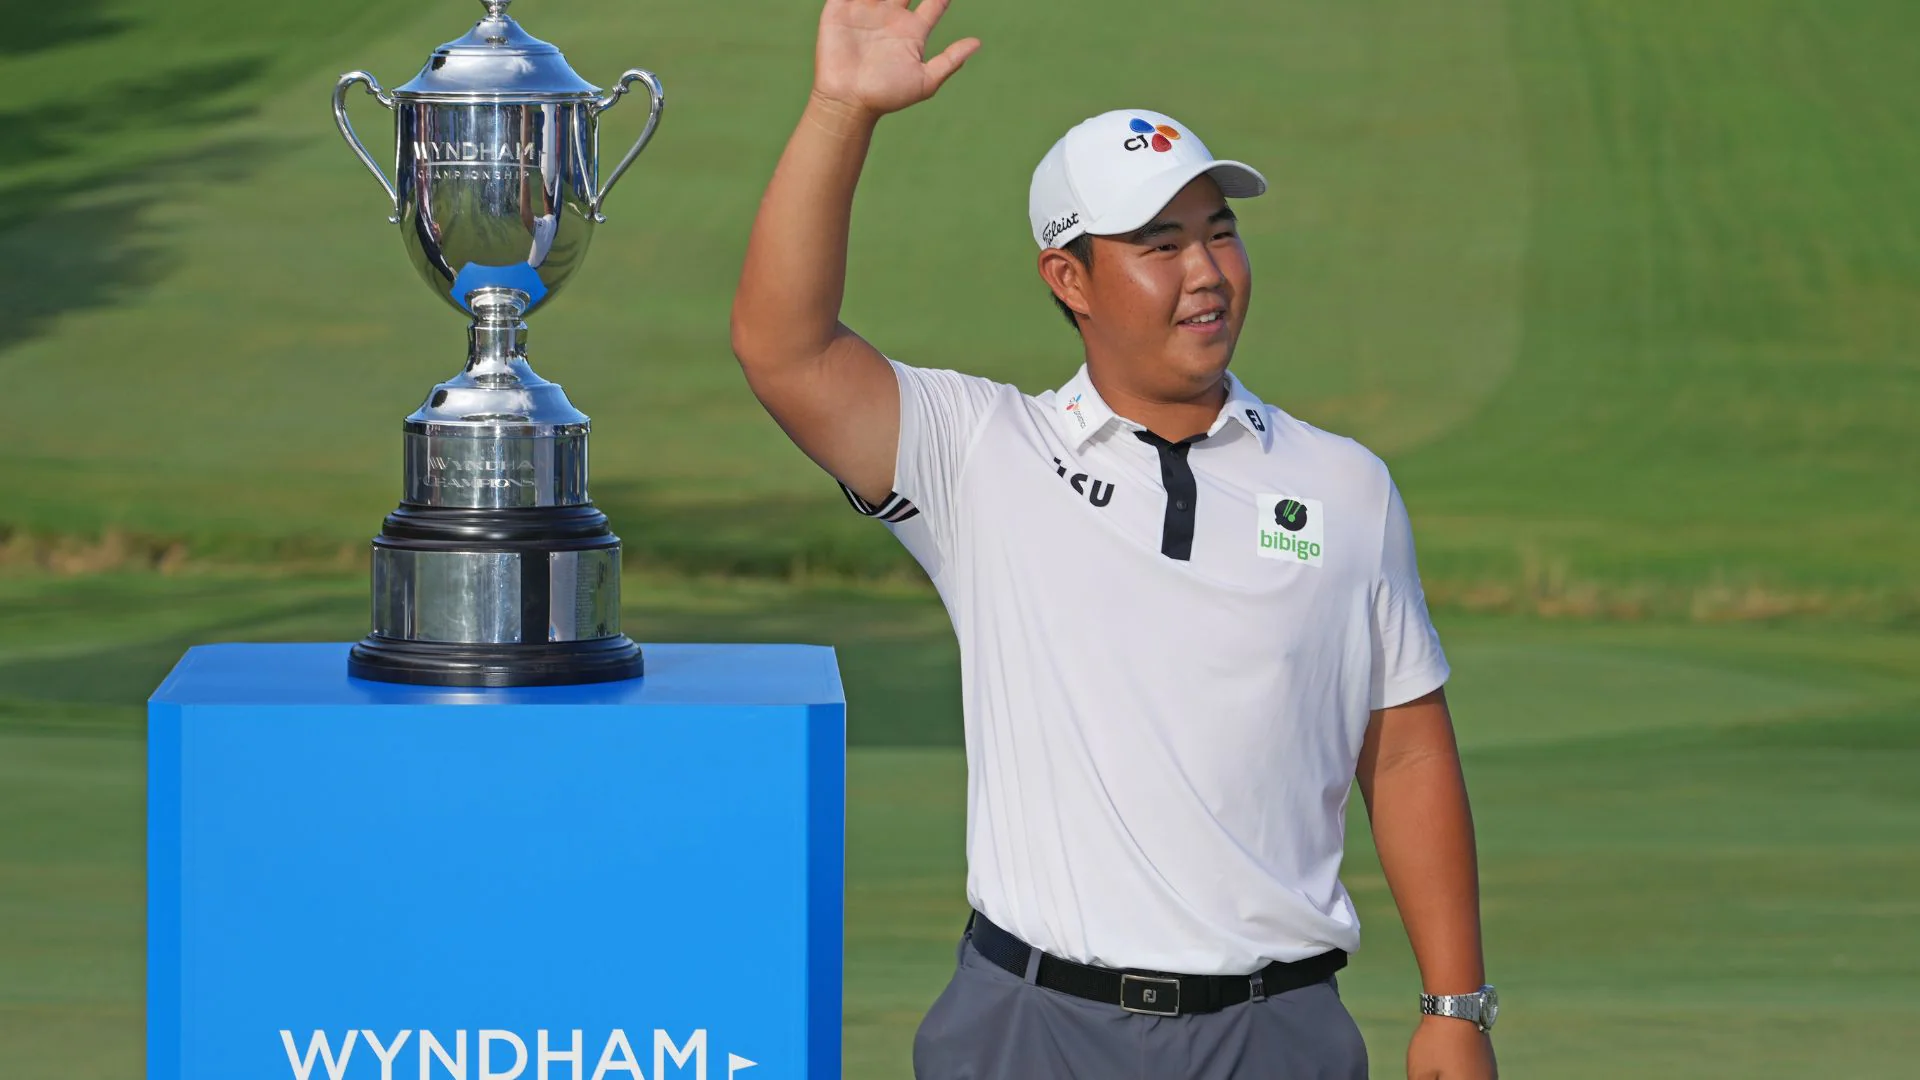 ‘Tiger never checked’: Tom Kim isn’t interested how much money he won at Wyndham Championship